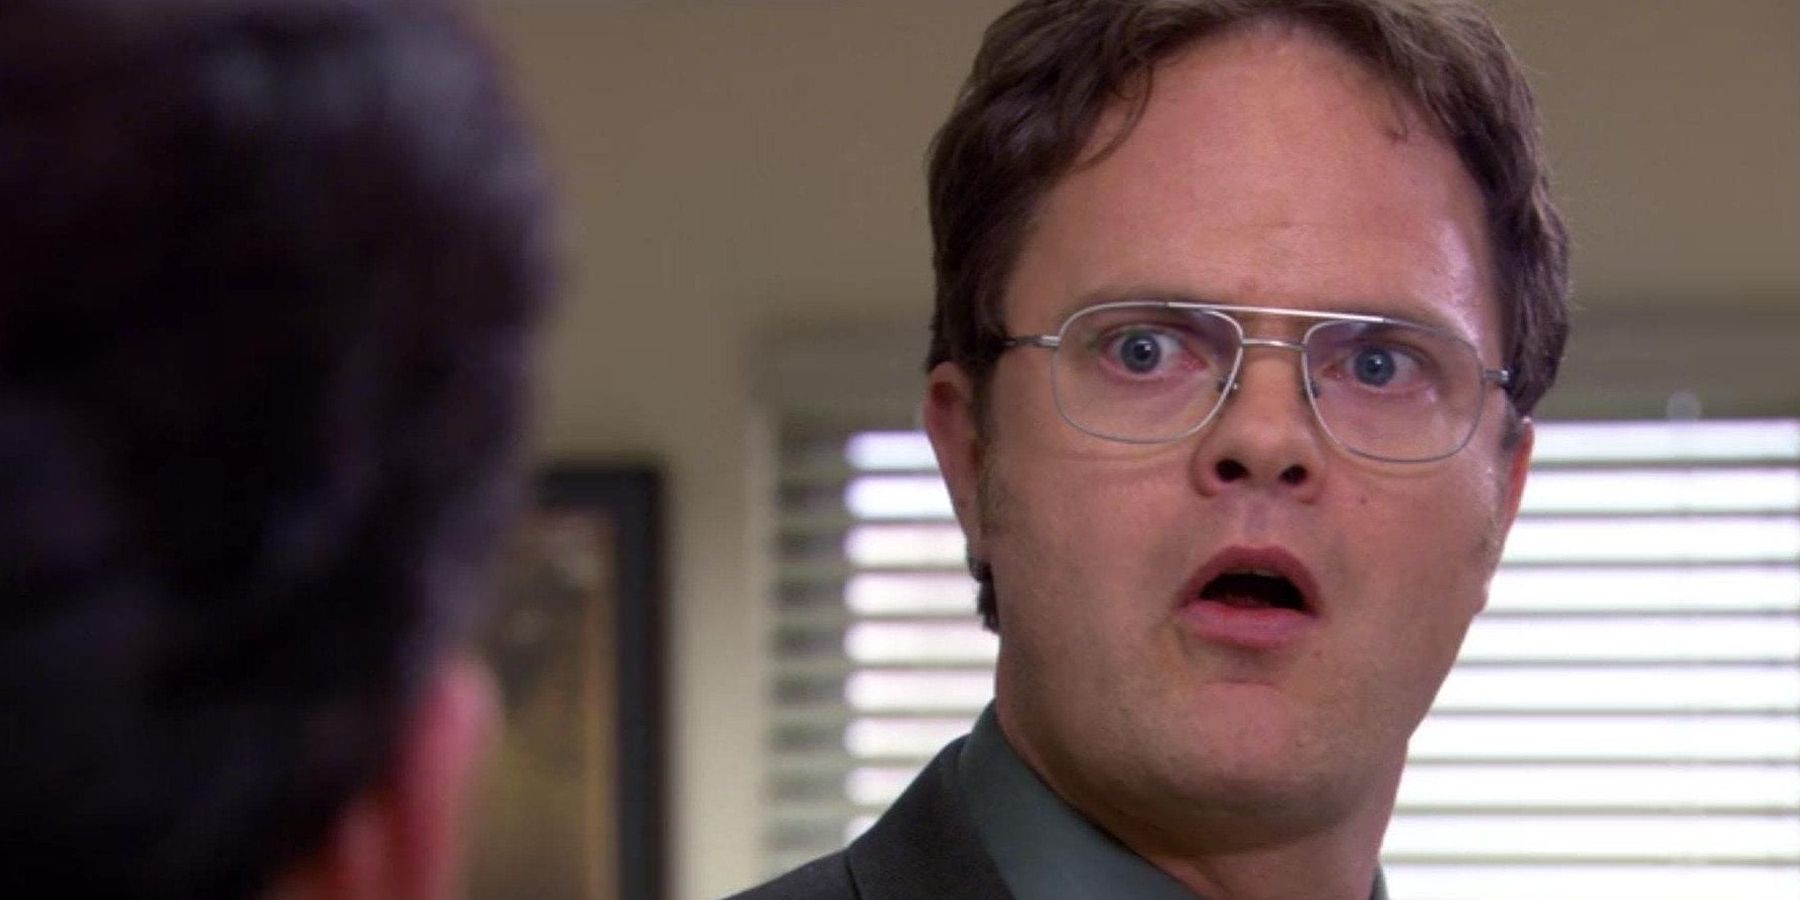 'Time to Move On': The Office Star Rainn Wilson Weighs in on Recent Jell-O Prank